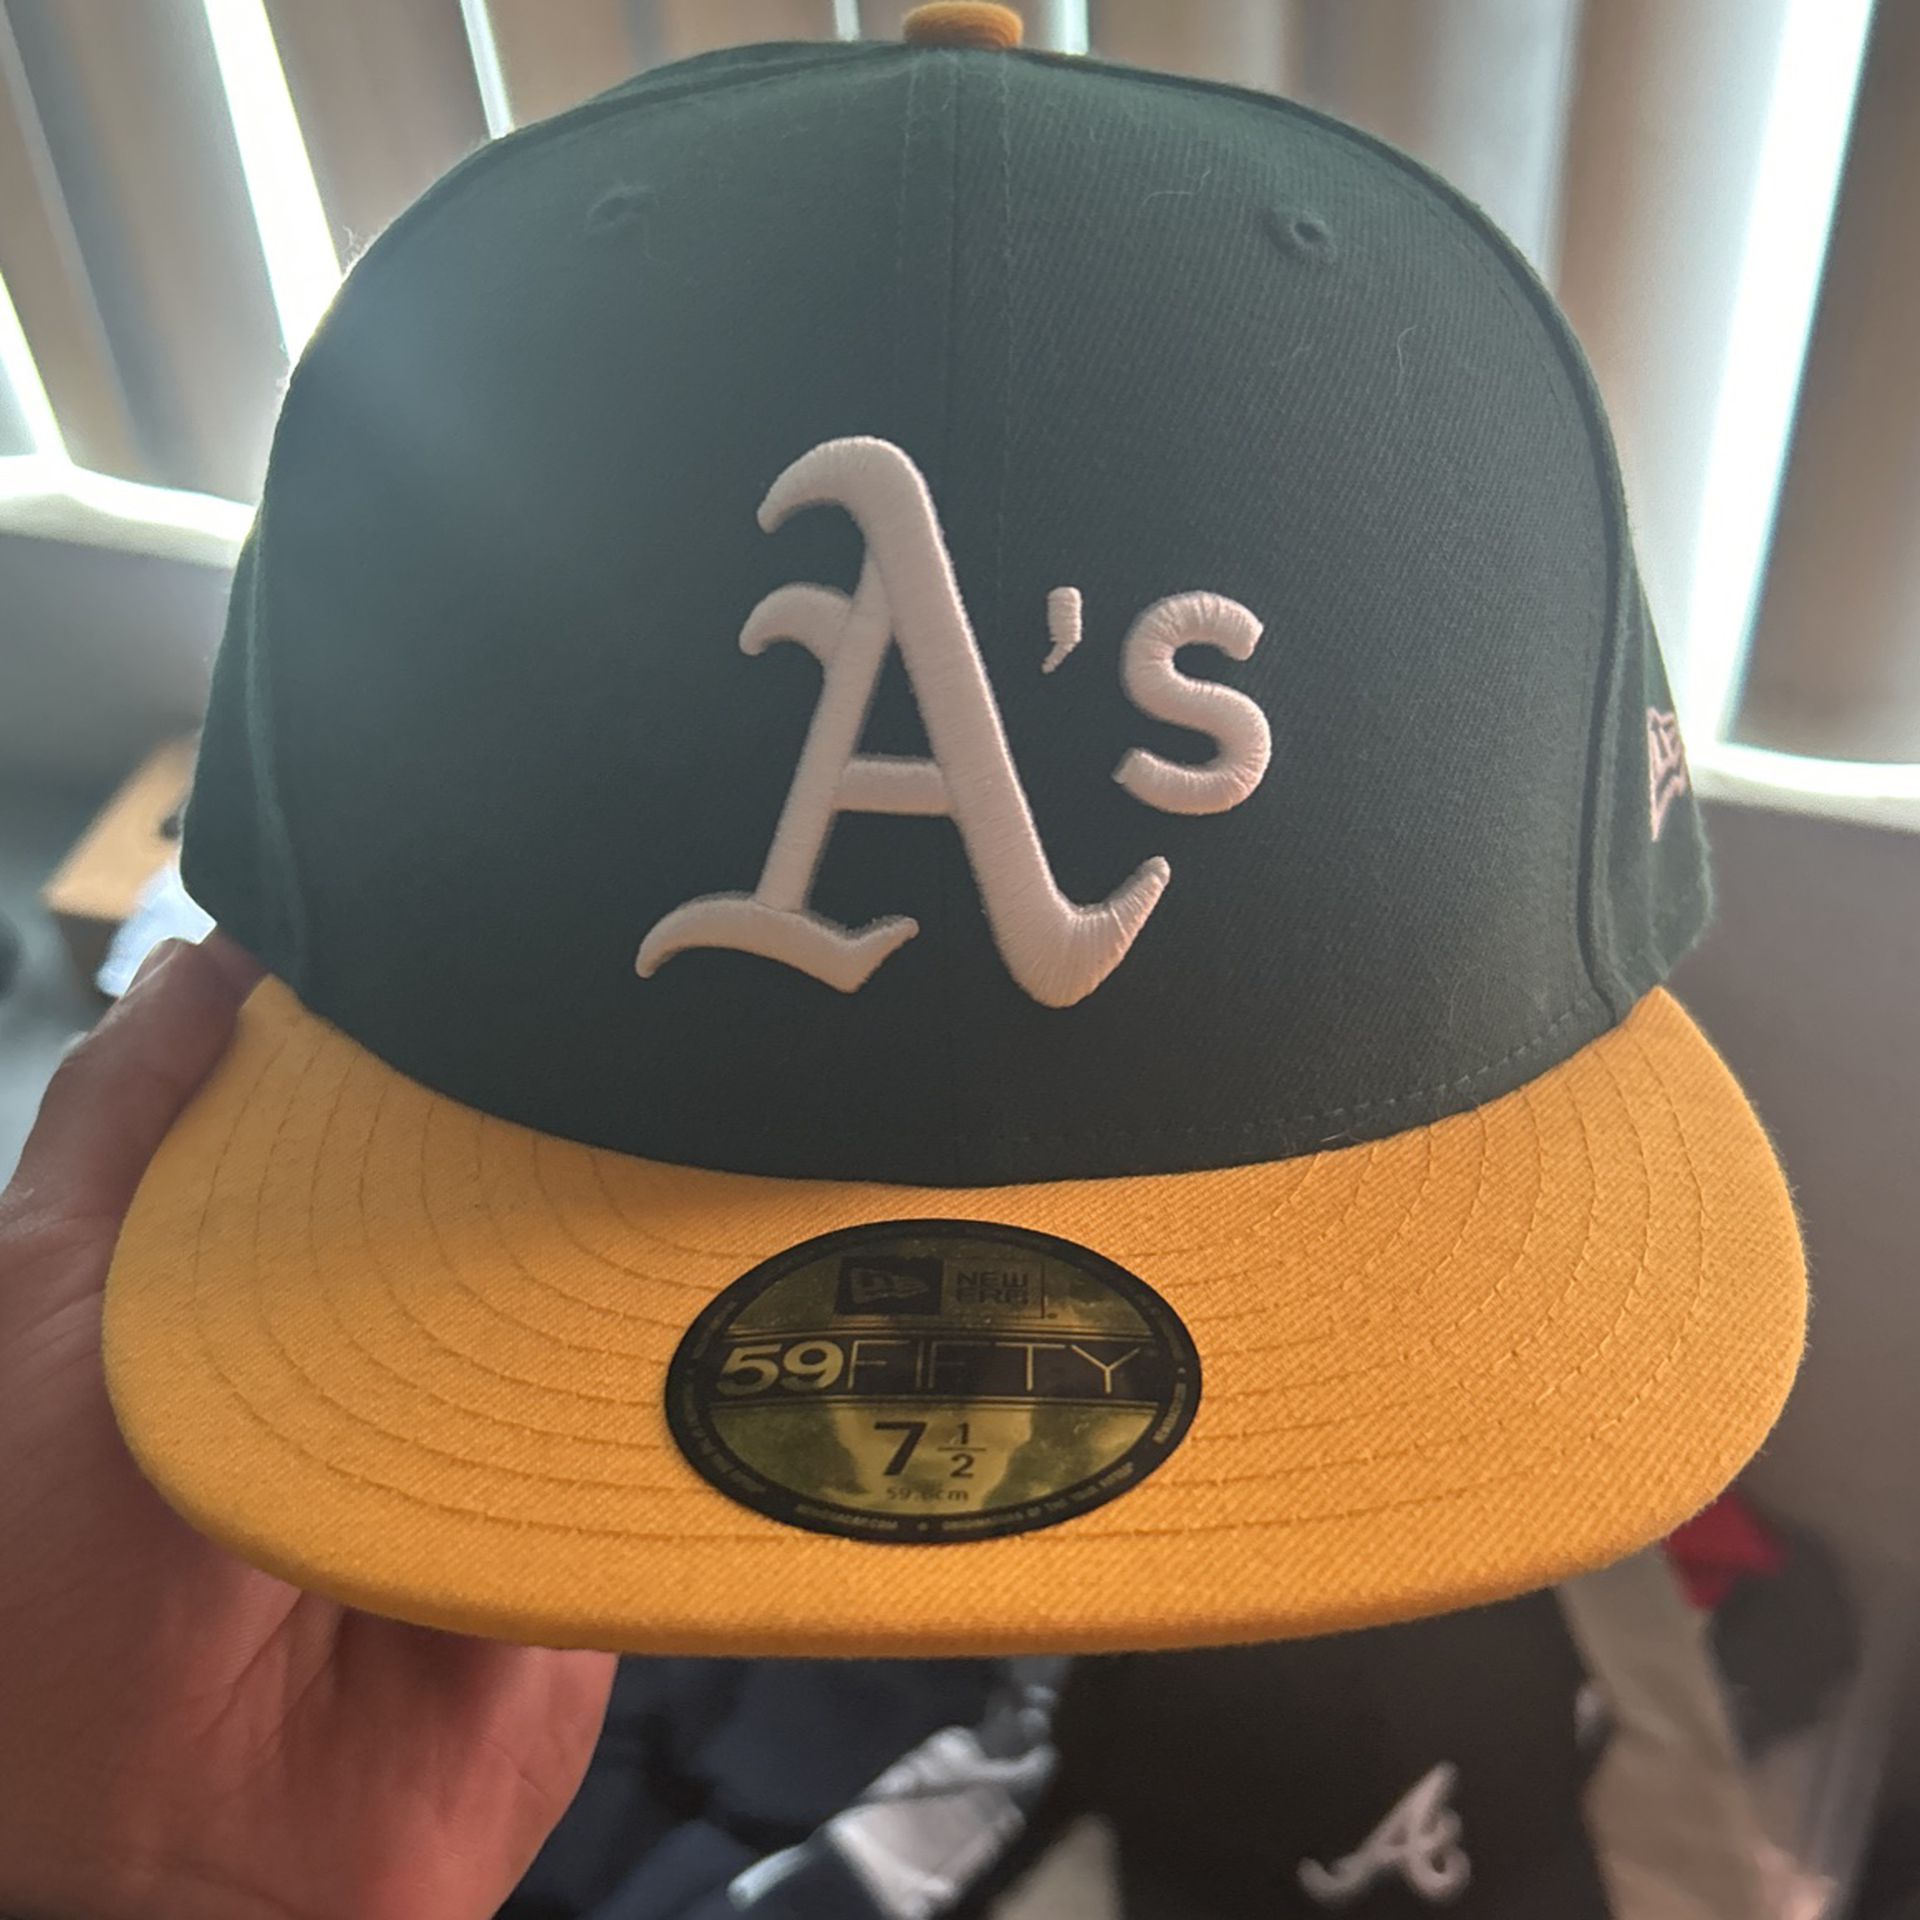 A’s Hat